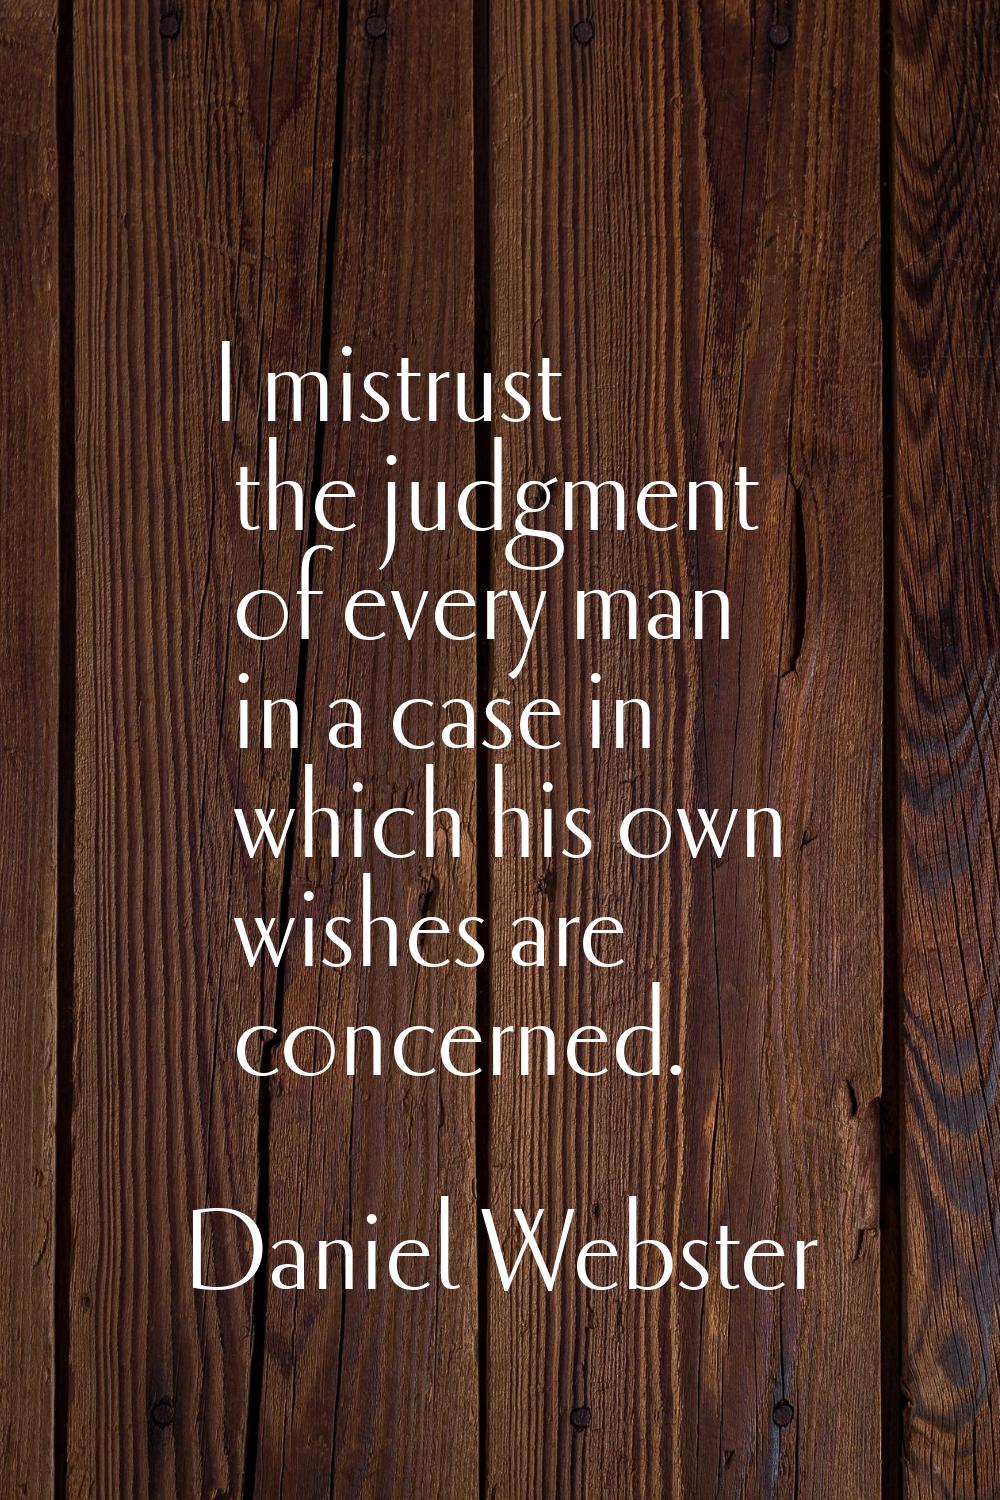 I mistrust the judgment of every man in a case in which his own wishes are concerned.